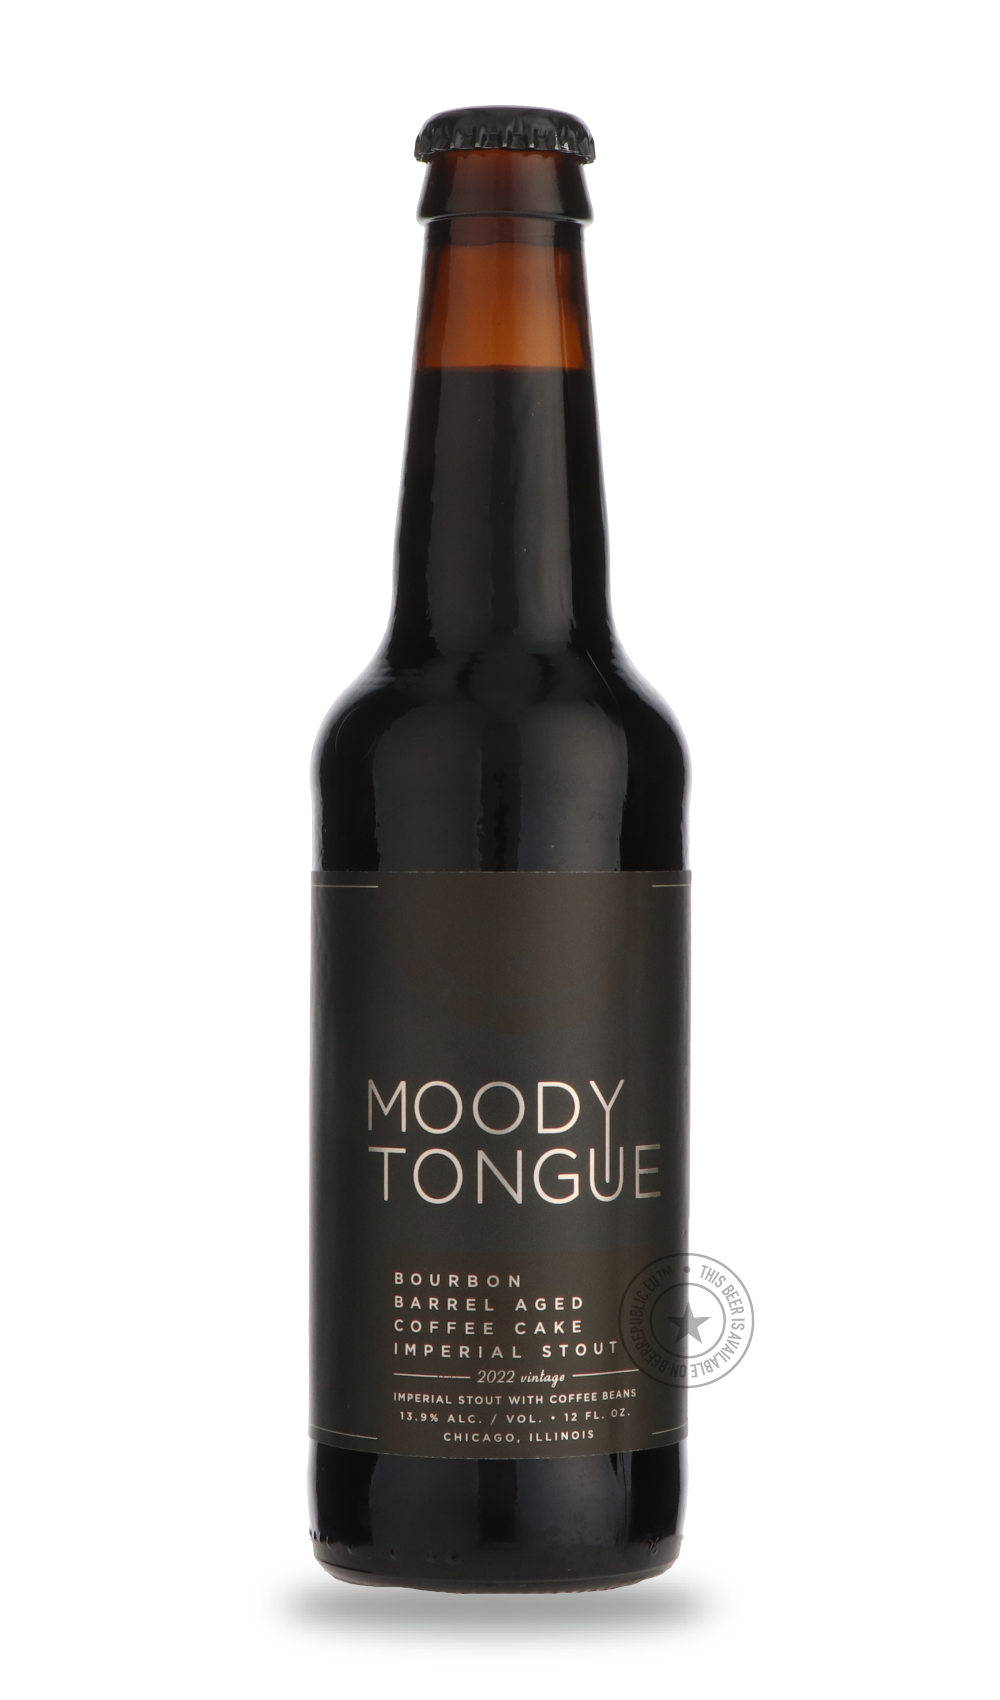 -Moody Tongue- Bourbon Barrel Aged Coffee Cake Imperial Stout-Stout & Porter- Only @ Beer Republic - The best online beer store for American & Canadian craft beer - Buy beer online from the USA and Canada - Bier online kopen - Amerikaans bier kopen - Craft beer store - Craft beer kopen - Amerikanisch bier kaufen - Bier online kaufen - Acheter biere online - IPA - Stout - Porter - New England IPA - Hazy IPA - Imperial Stout - Barrel Aged - Barrel Aged Imperial Stout - Brown - Dark beer - Blond - Blonde - Pil